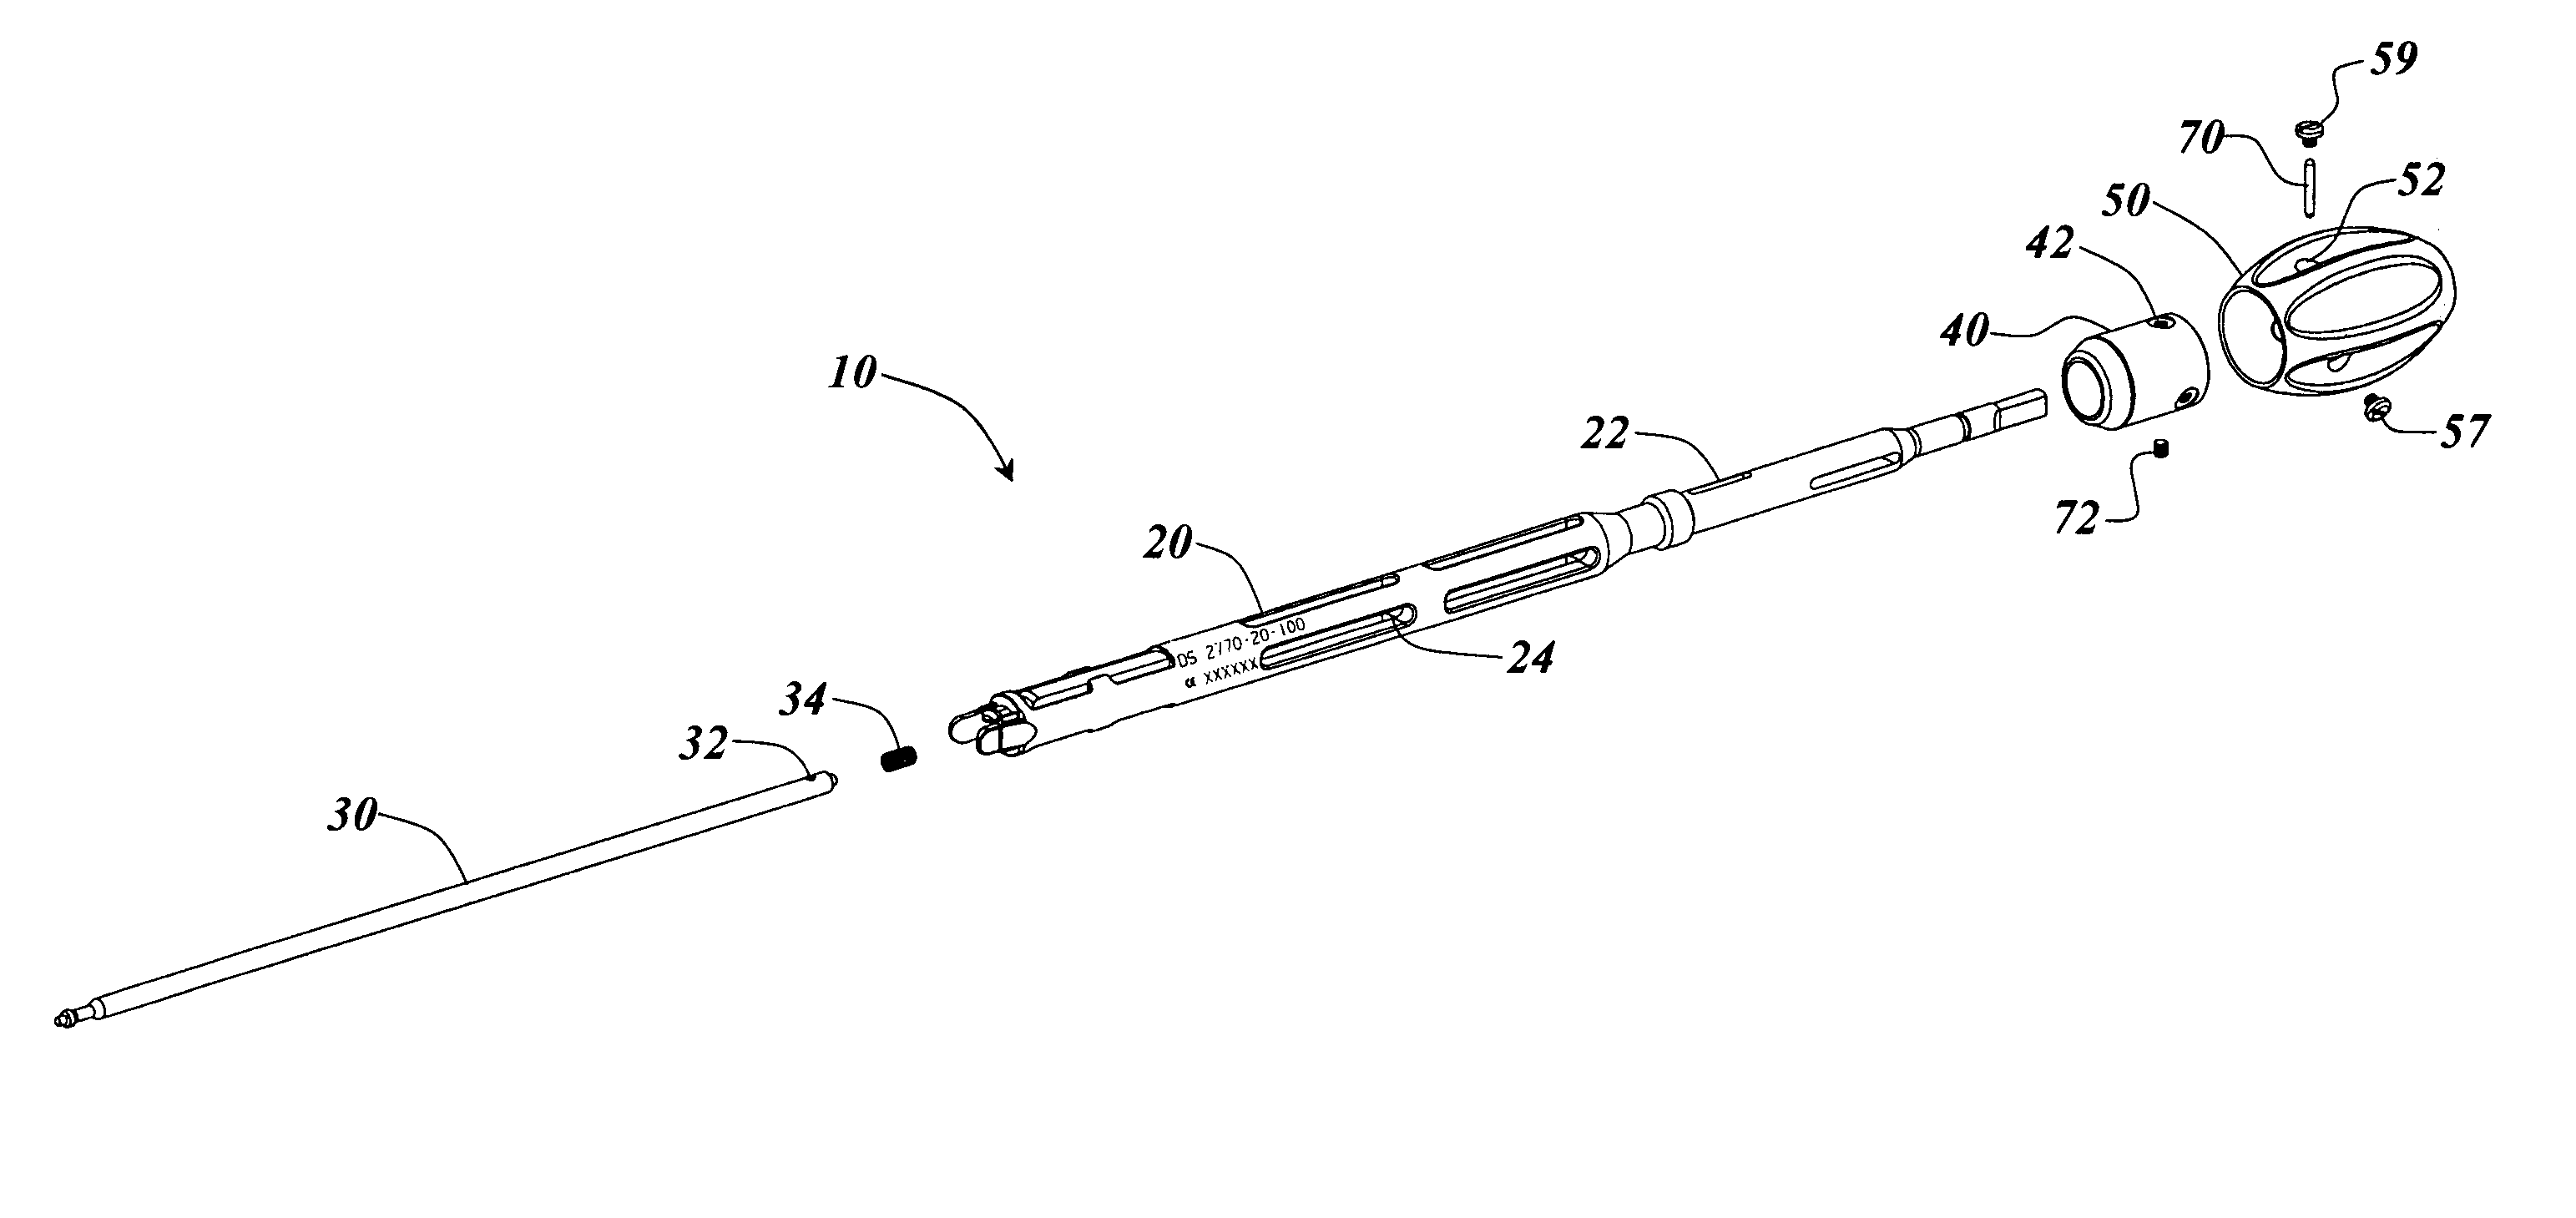 Instrument for inserting, adjusting and removing pedicle screws and other orthopedic implants